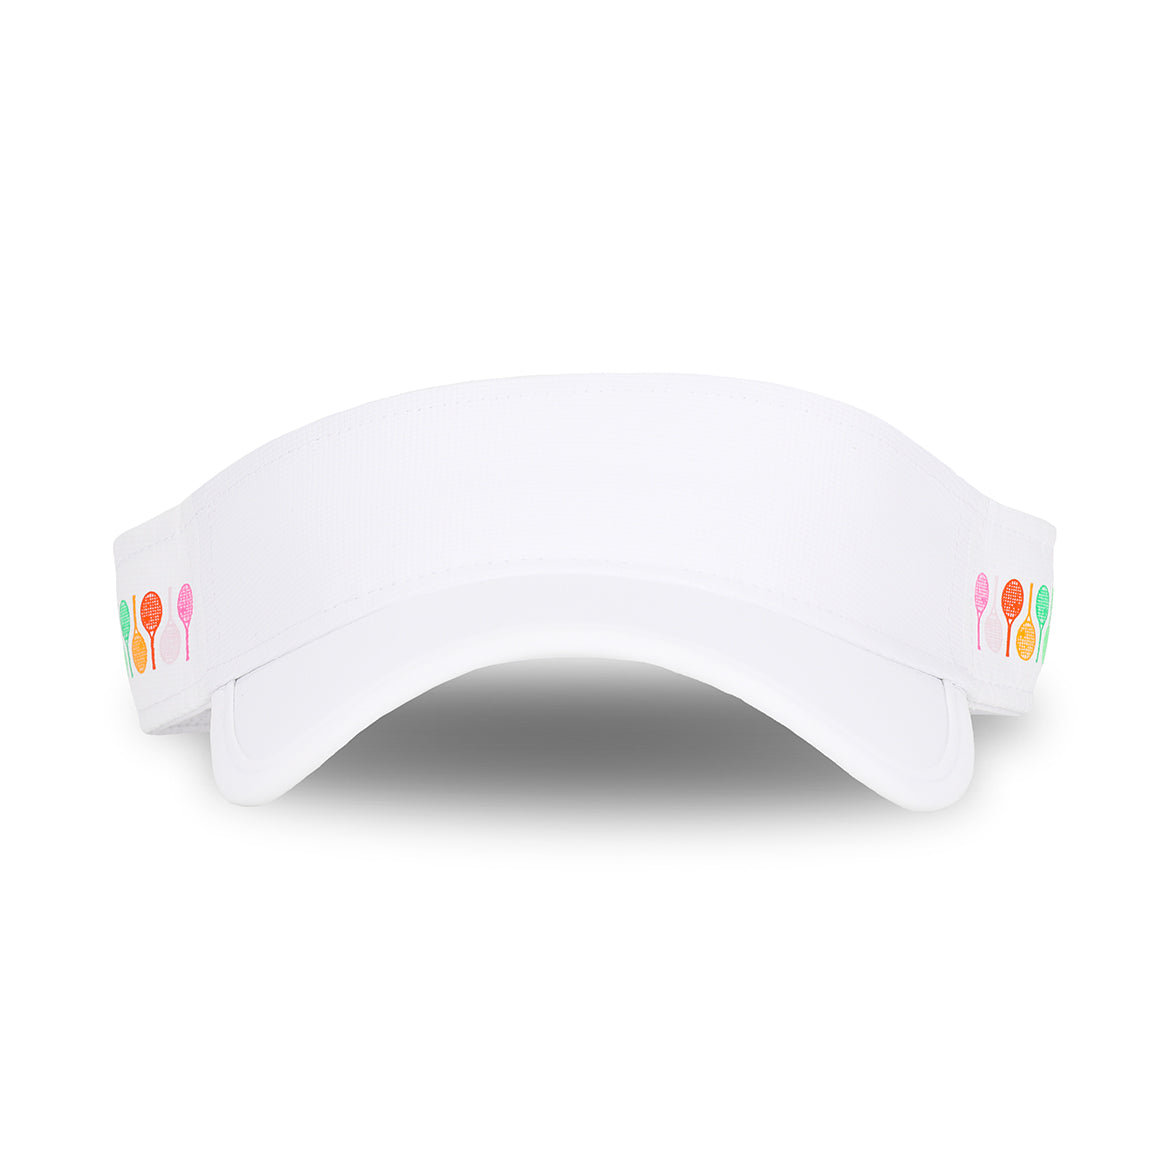 Front view of rainbow racquets head in the game visor. Visor is all white with rainbow racquets printed on the sides.